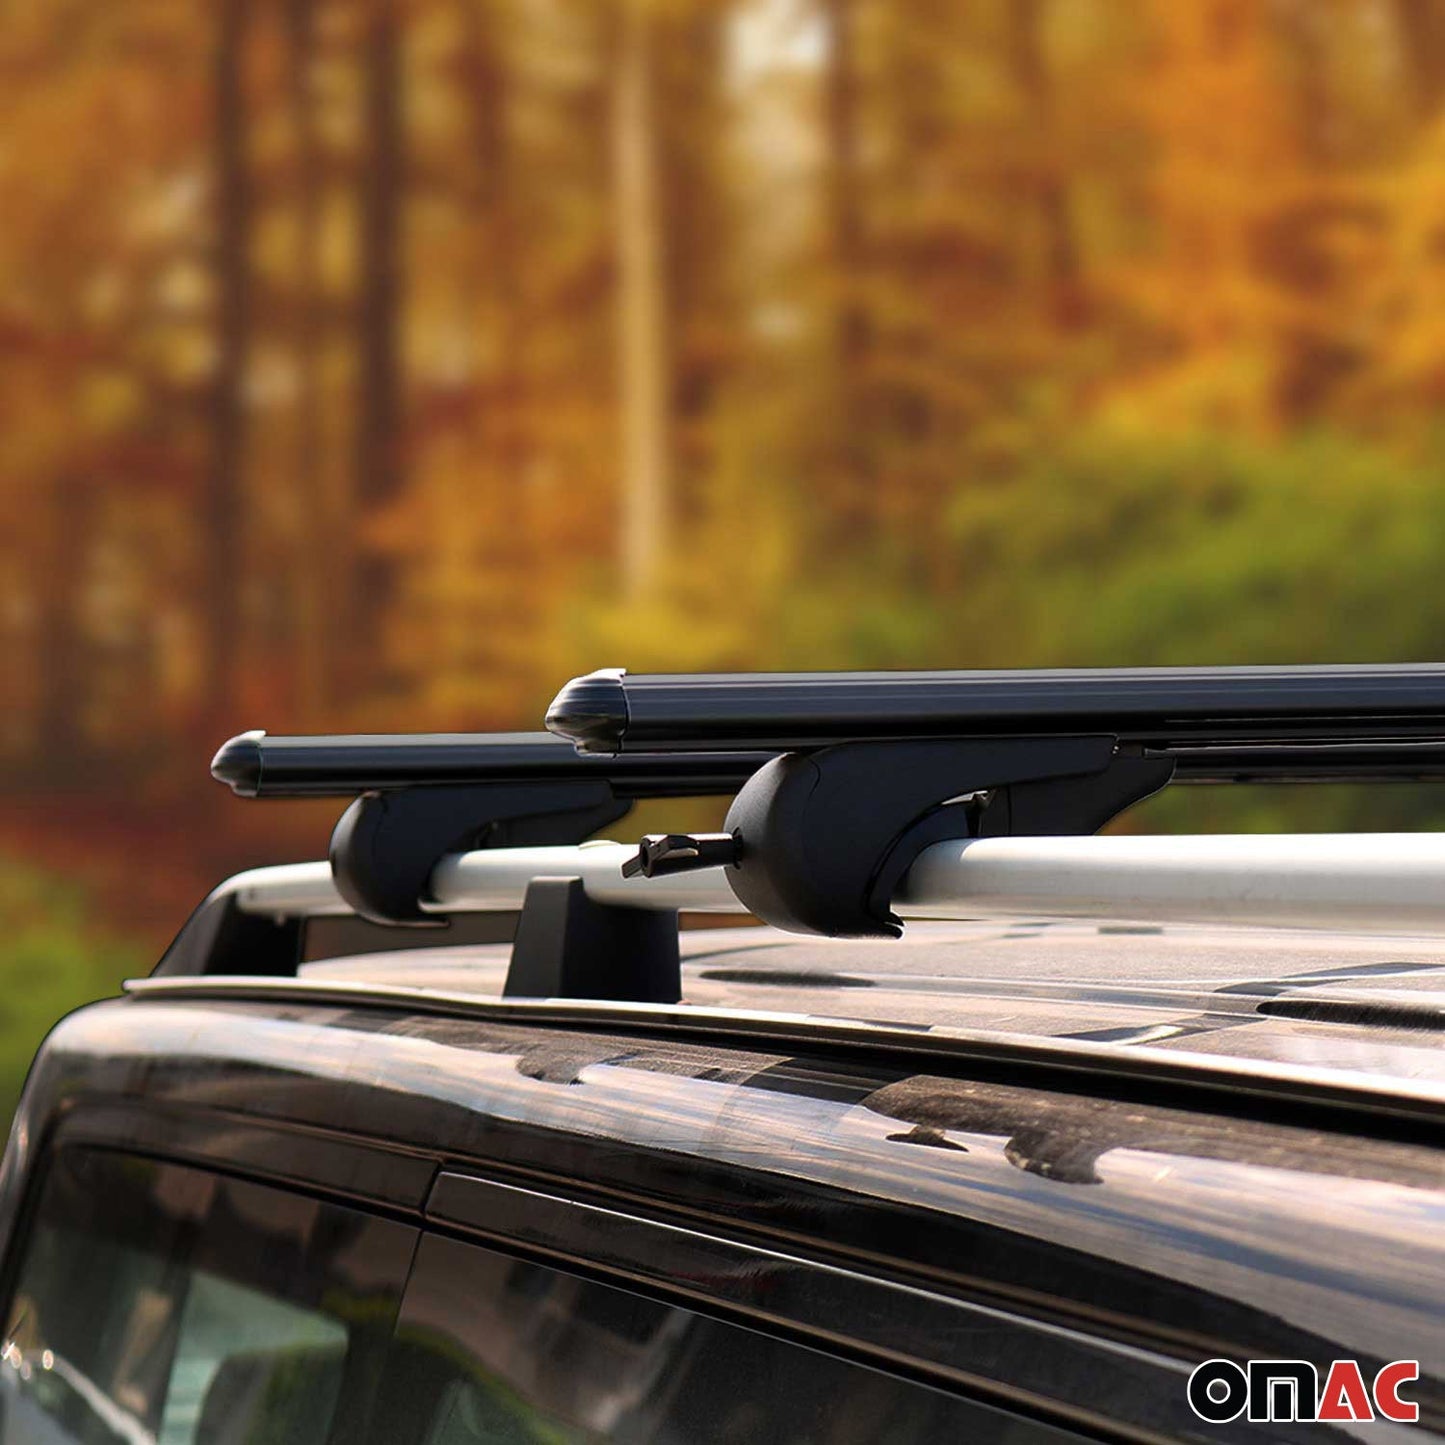 OMAC Roof Rack for BMW X5 E70 2008-2013 Cross Bars Luggage Carrier Black 12029696929LB